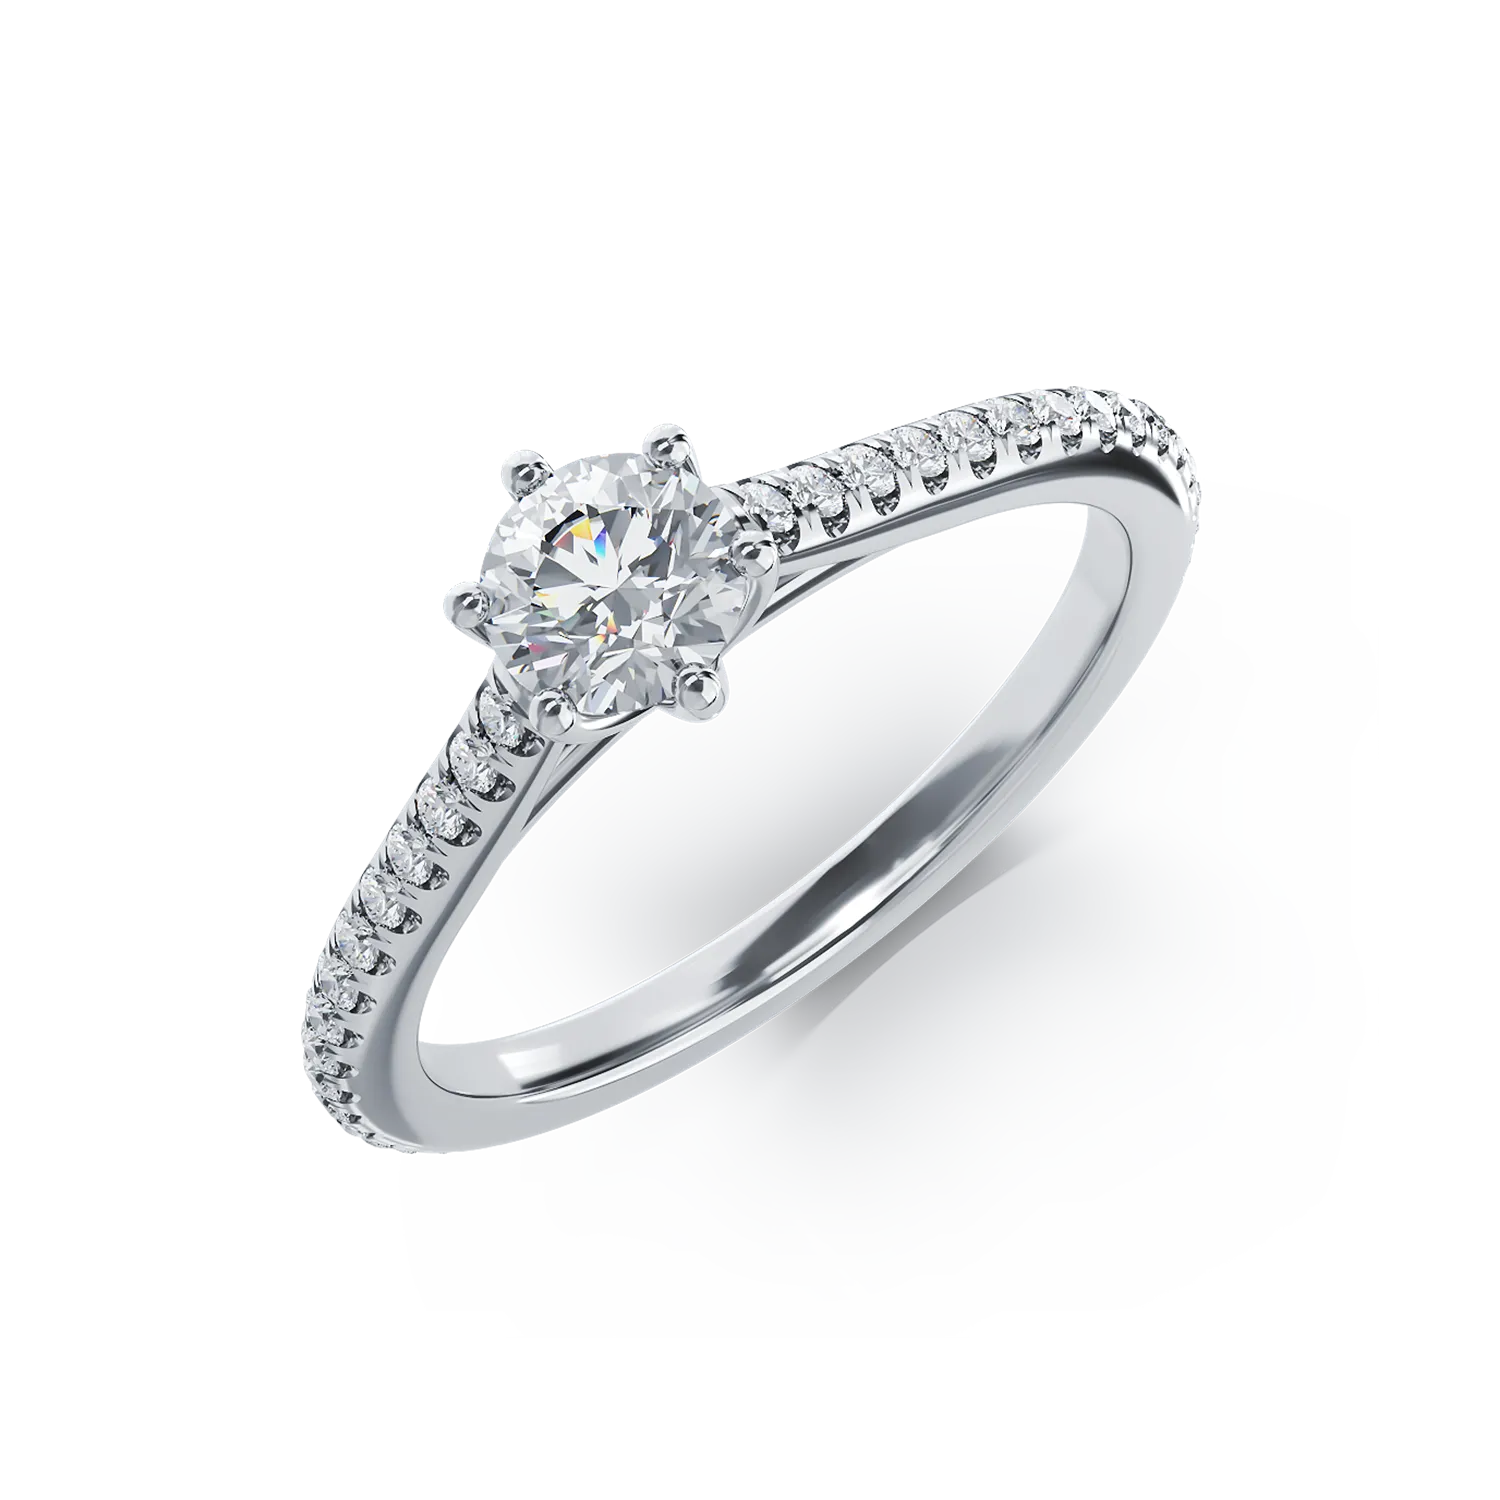 18K white gold engagement ring with 0.6ct diamond and 0.188ct diamonds